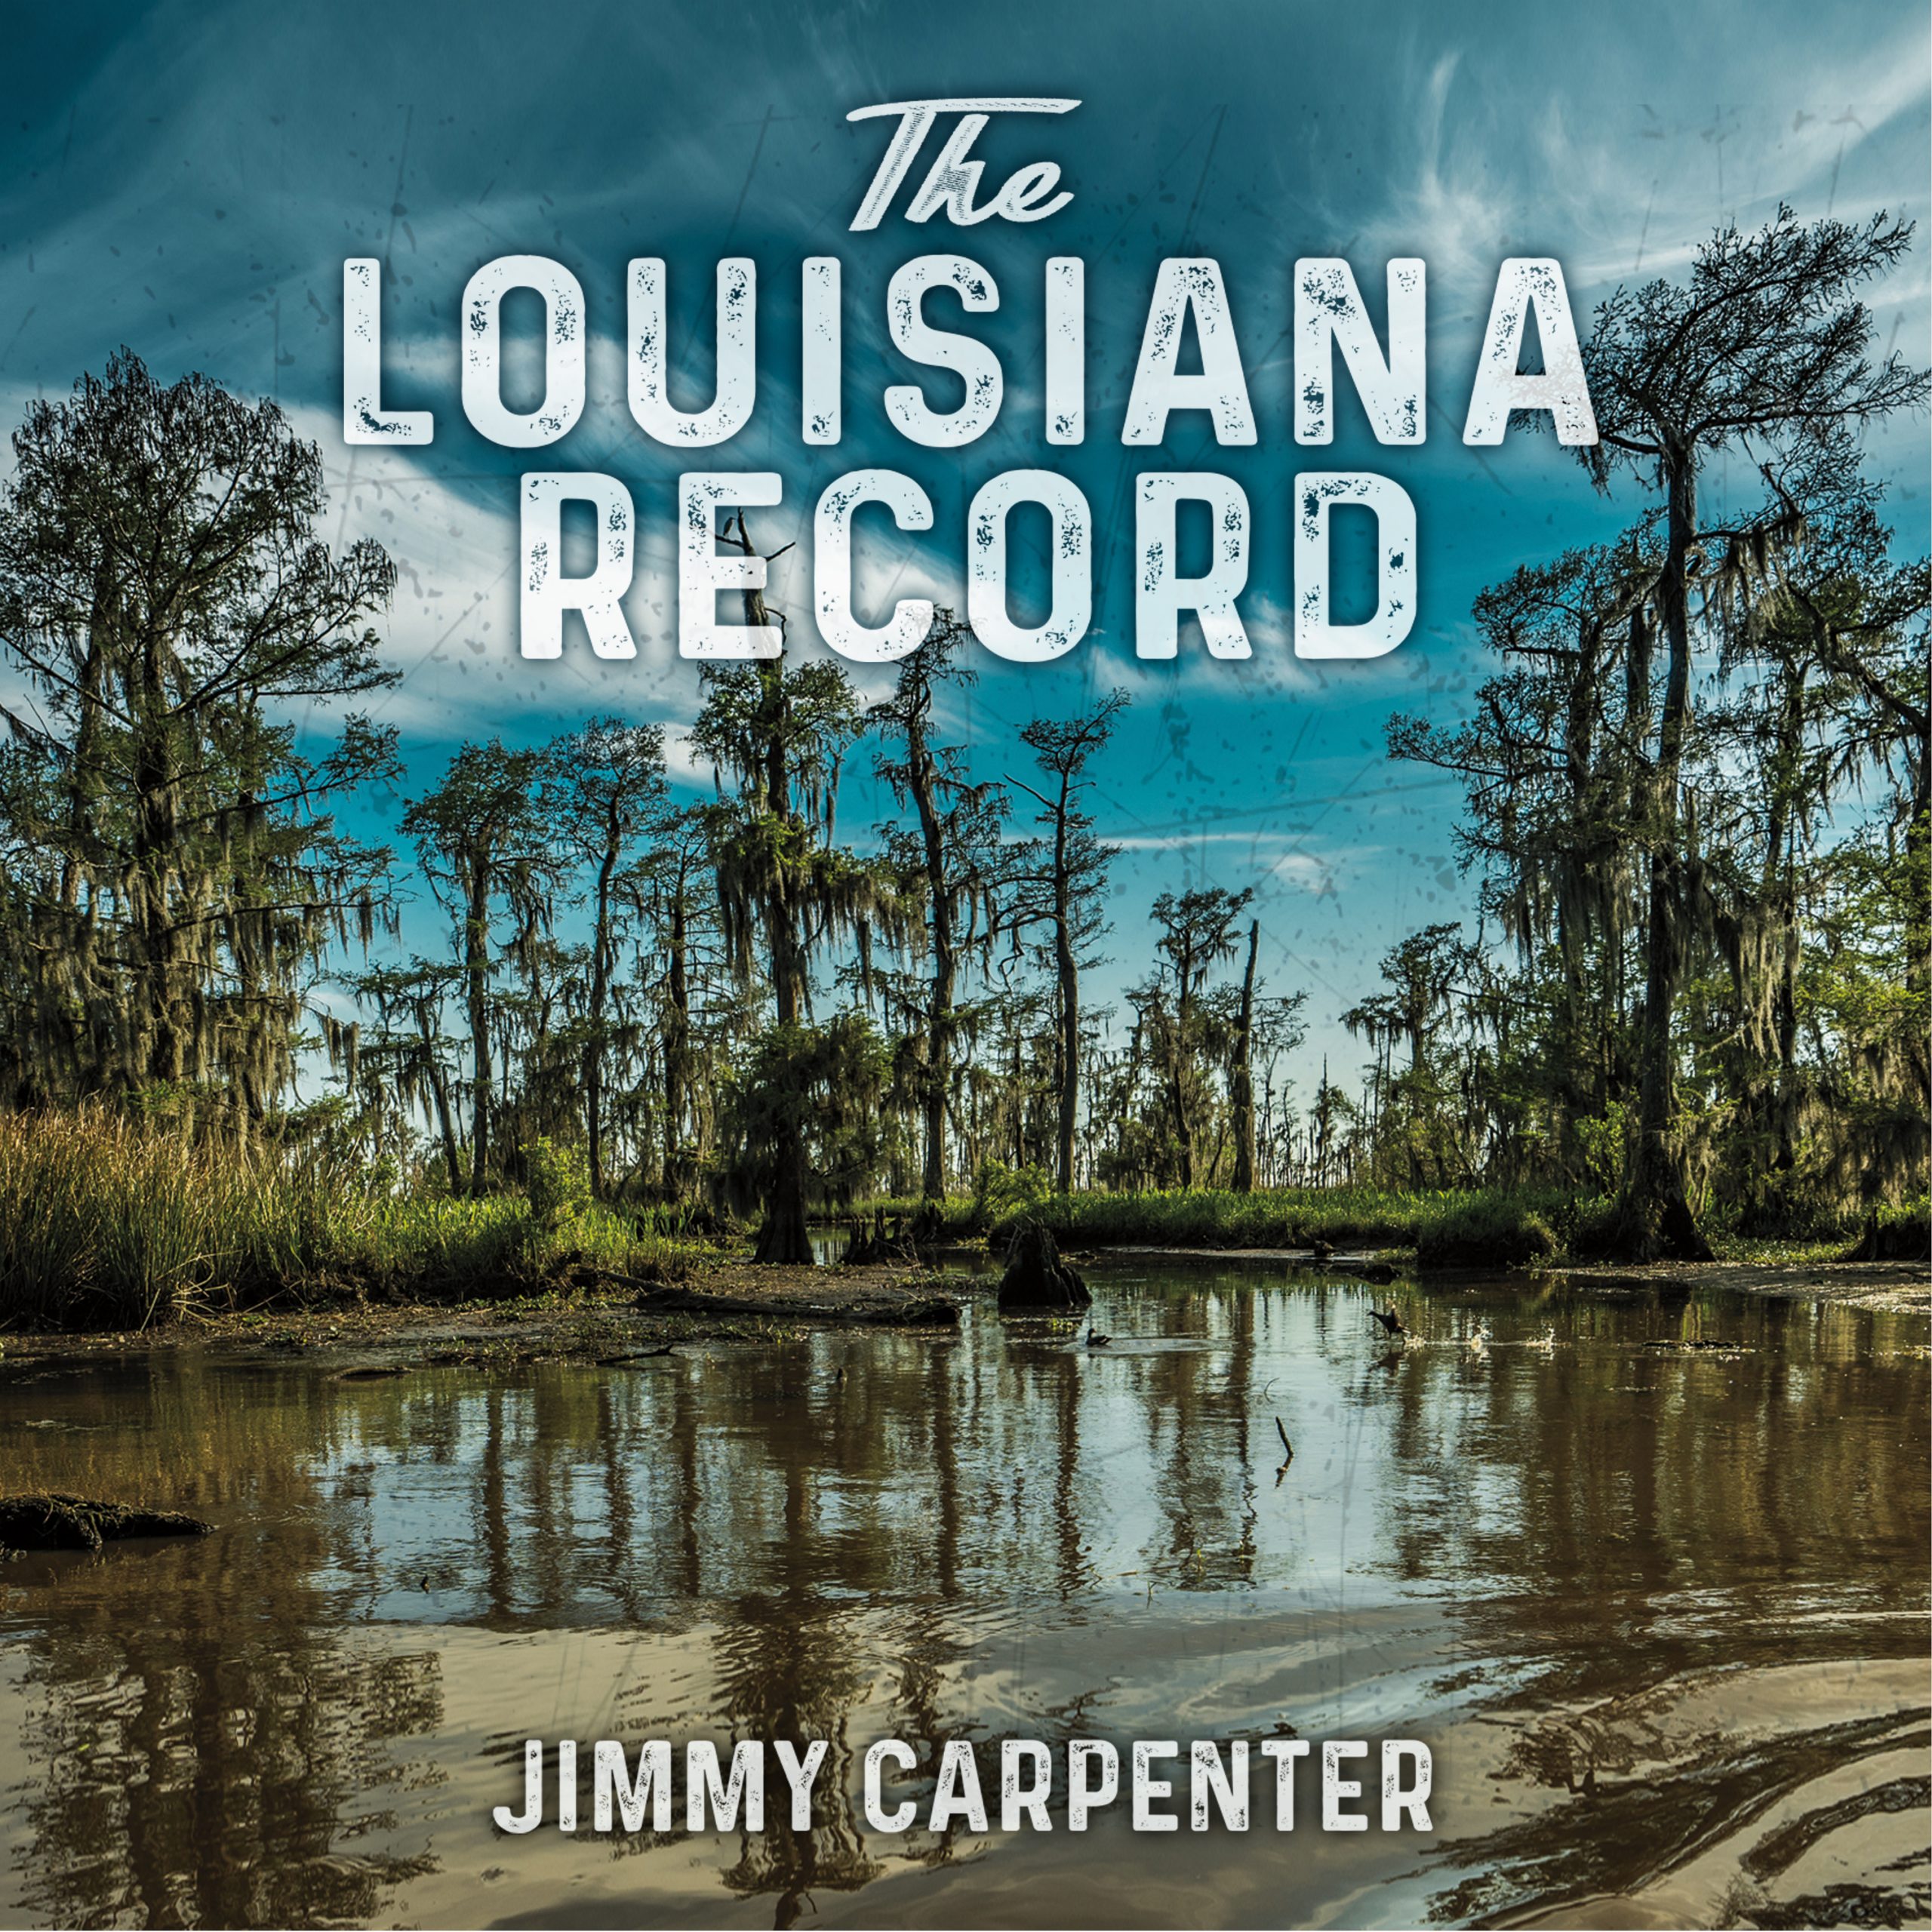 Jimmy Carpenter Explores His Crescent City Roots on "The Louisiana Record," Due September 16